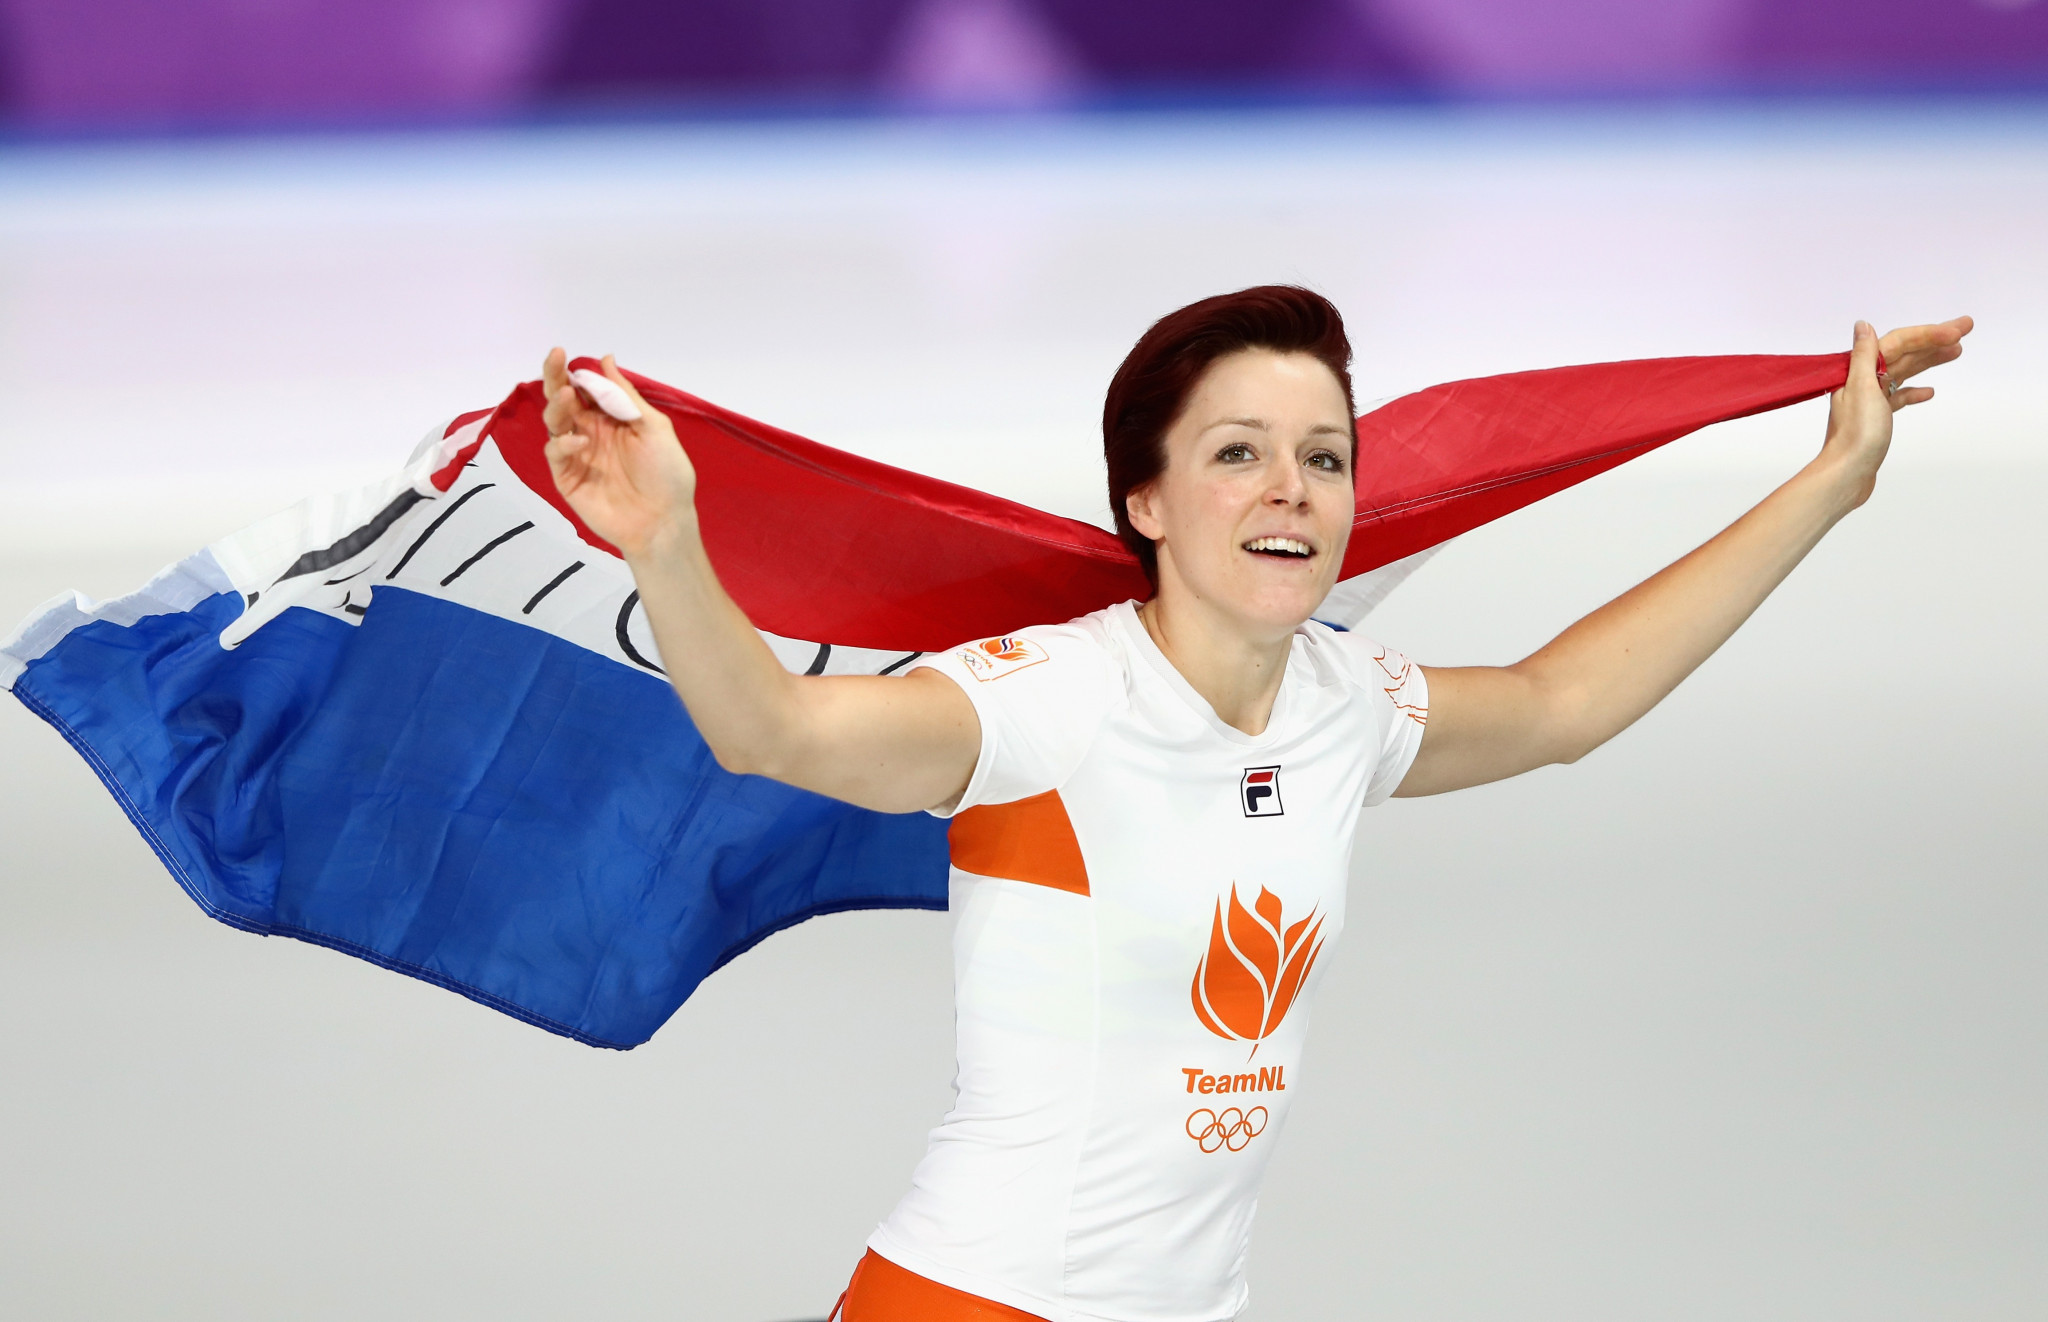 The Netherlands’ Jorien Ter Mors set an Olympic record to win the women’s 1,000 metres speed skating event at Pyeongchang 2018 today ©Getty Images